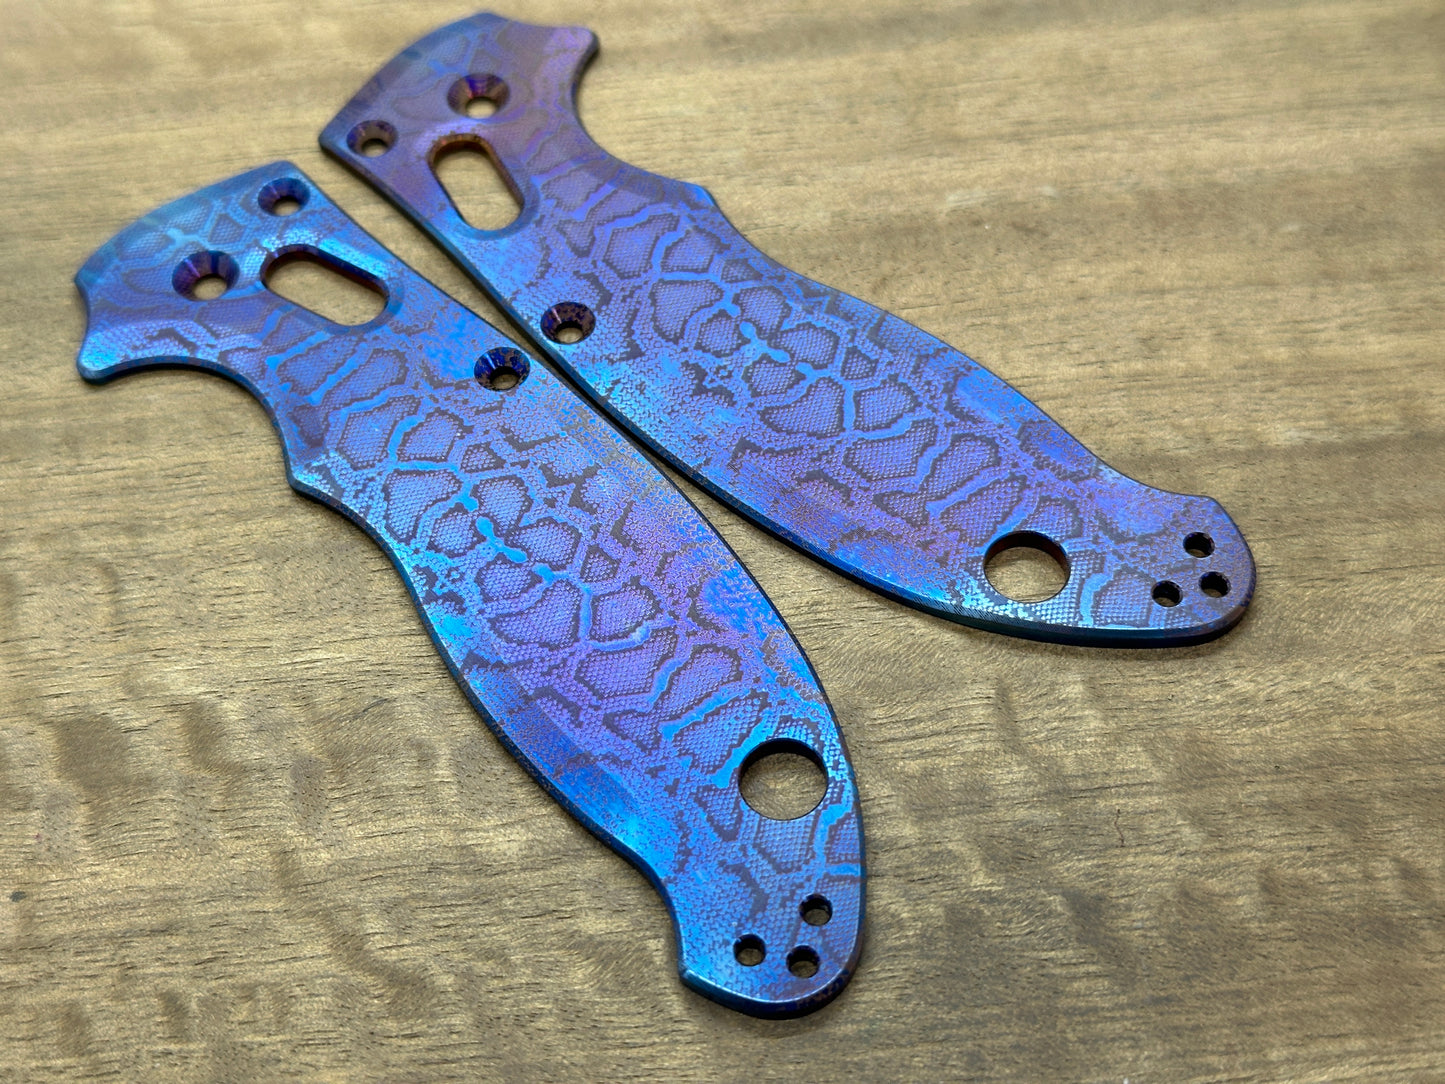 Flamed REPTILIAN engraved Titanium scales for Spyderco MANIX 2